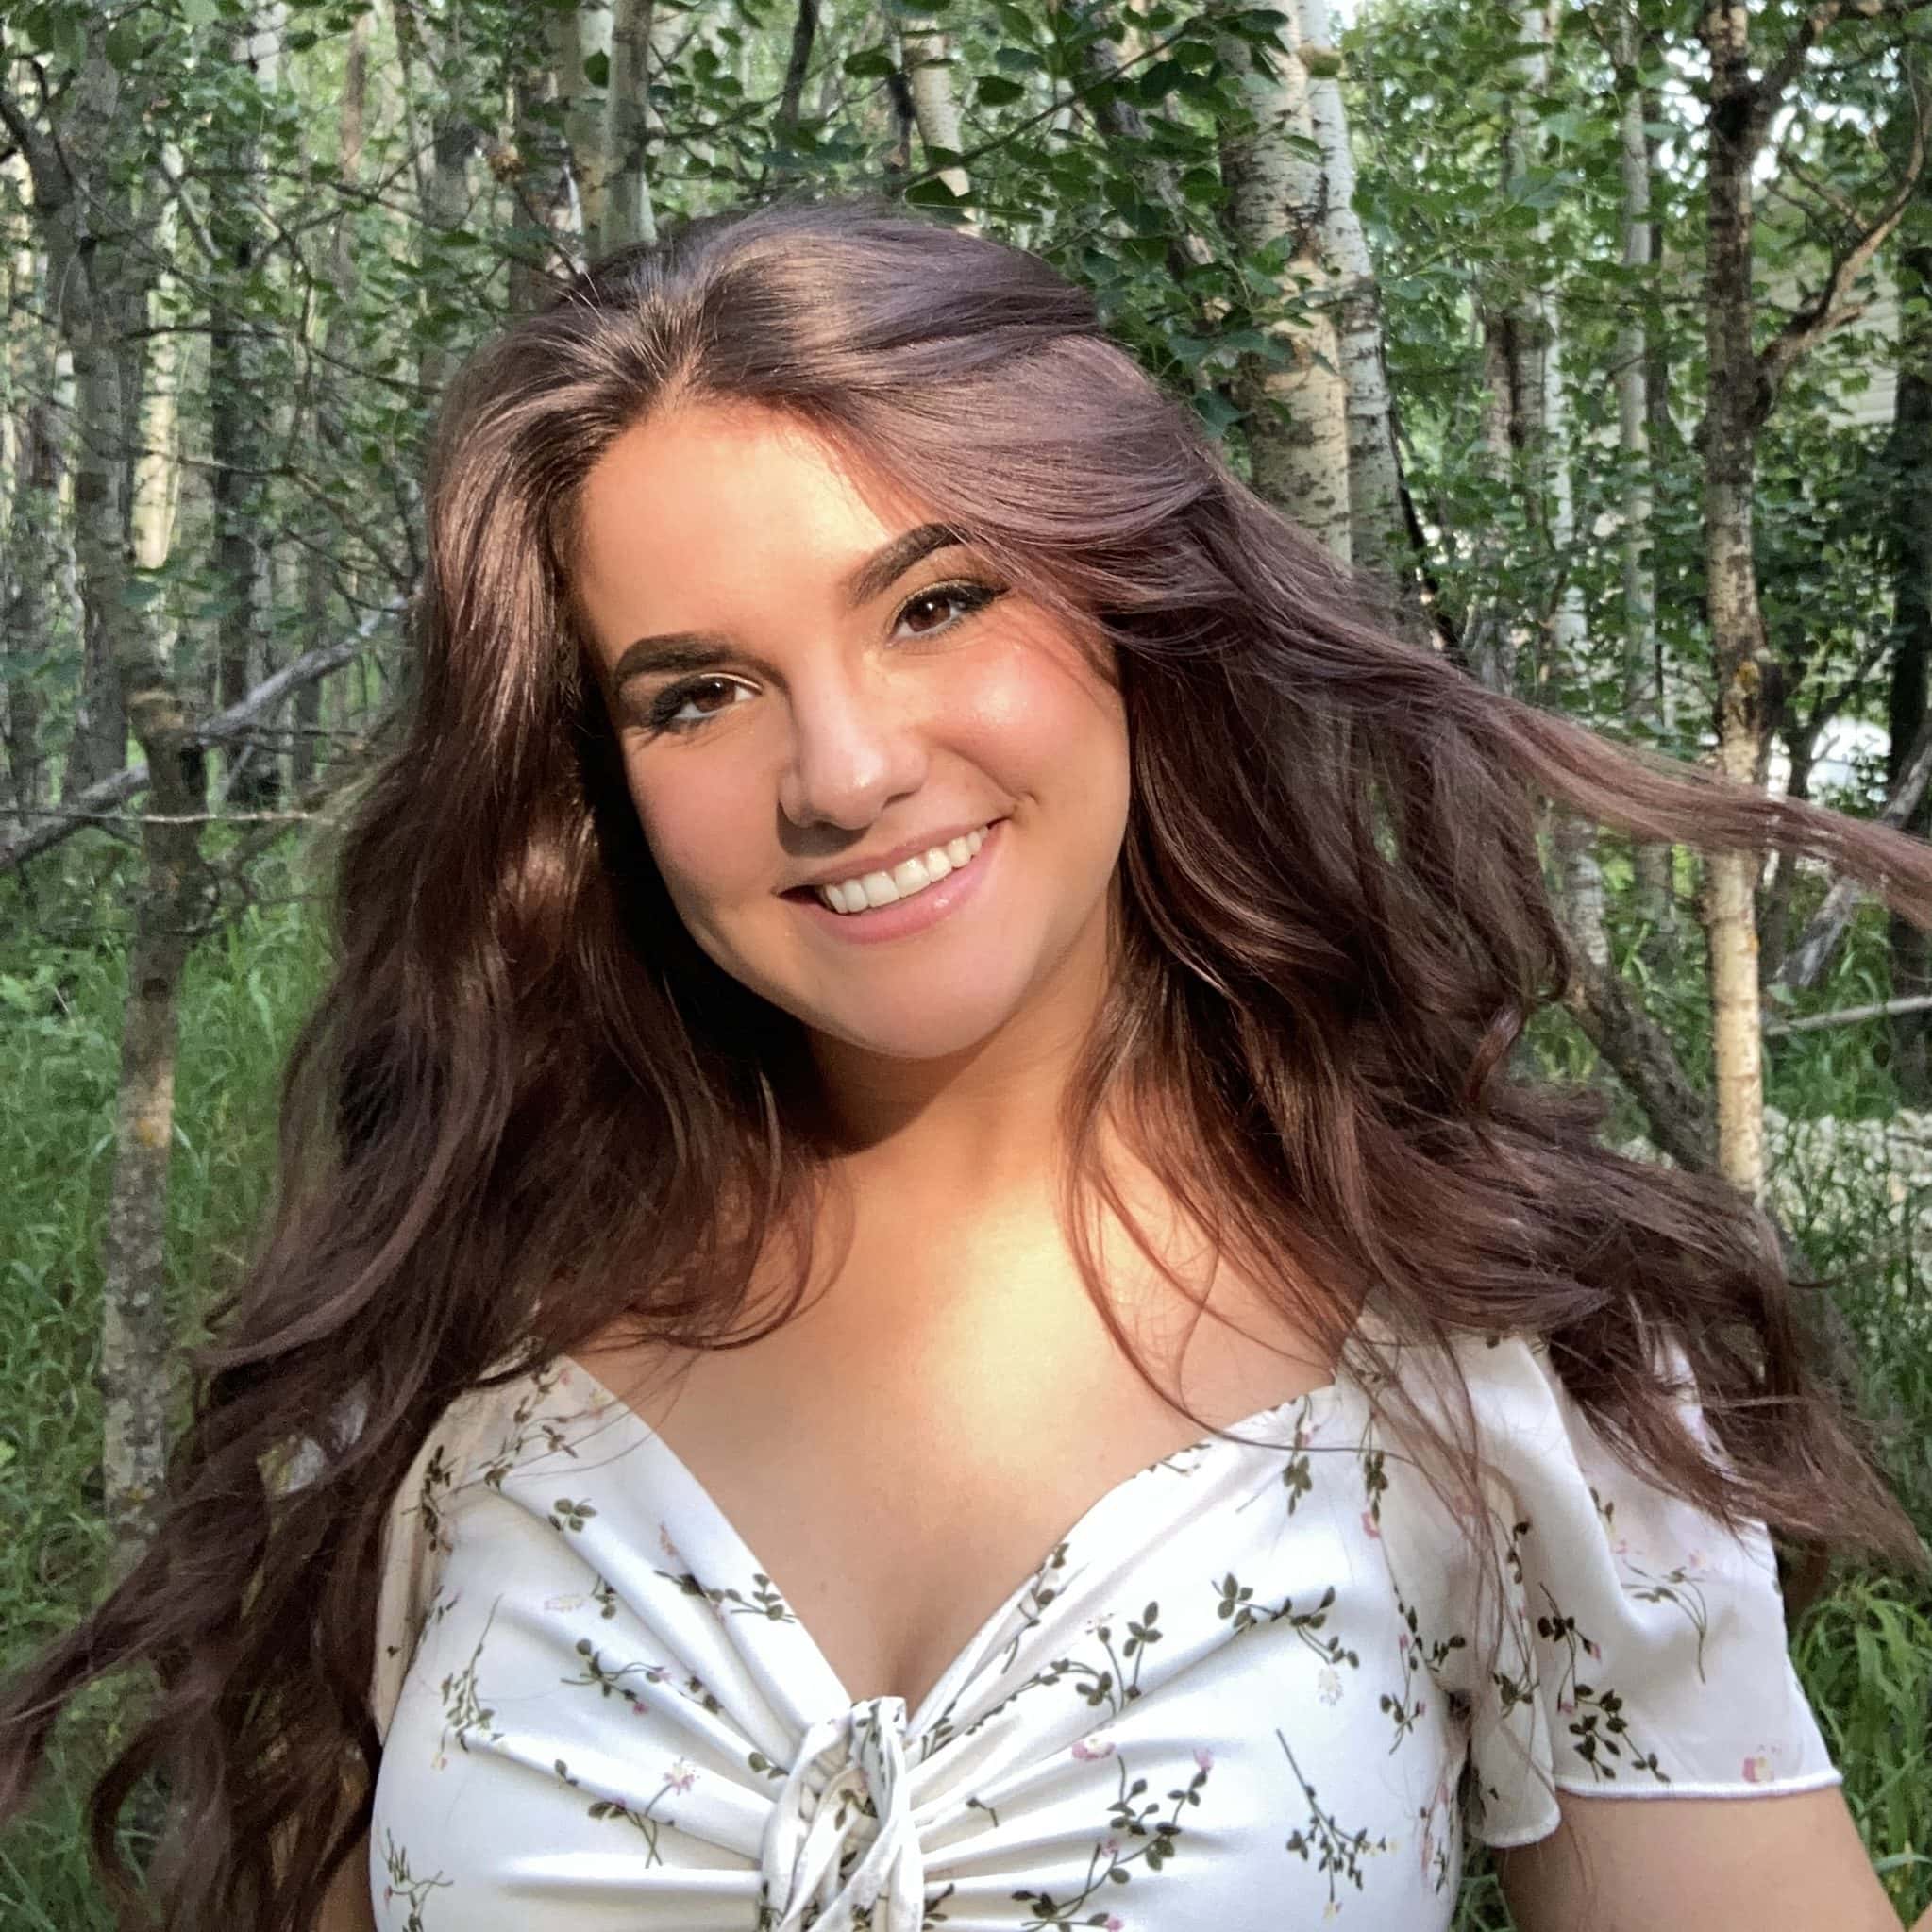 A young person with long brown hair smiling and standing in a forest